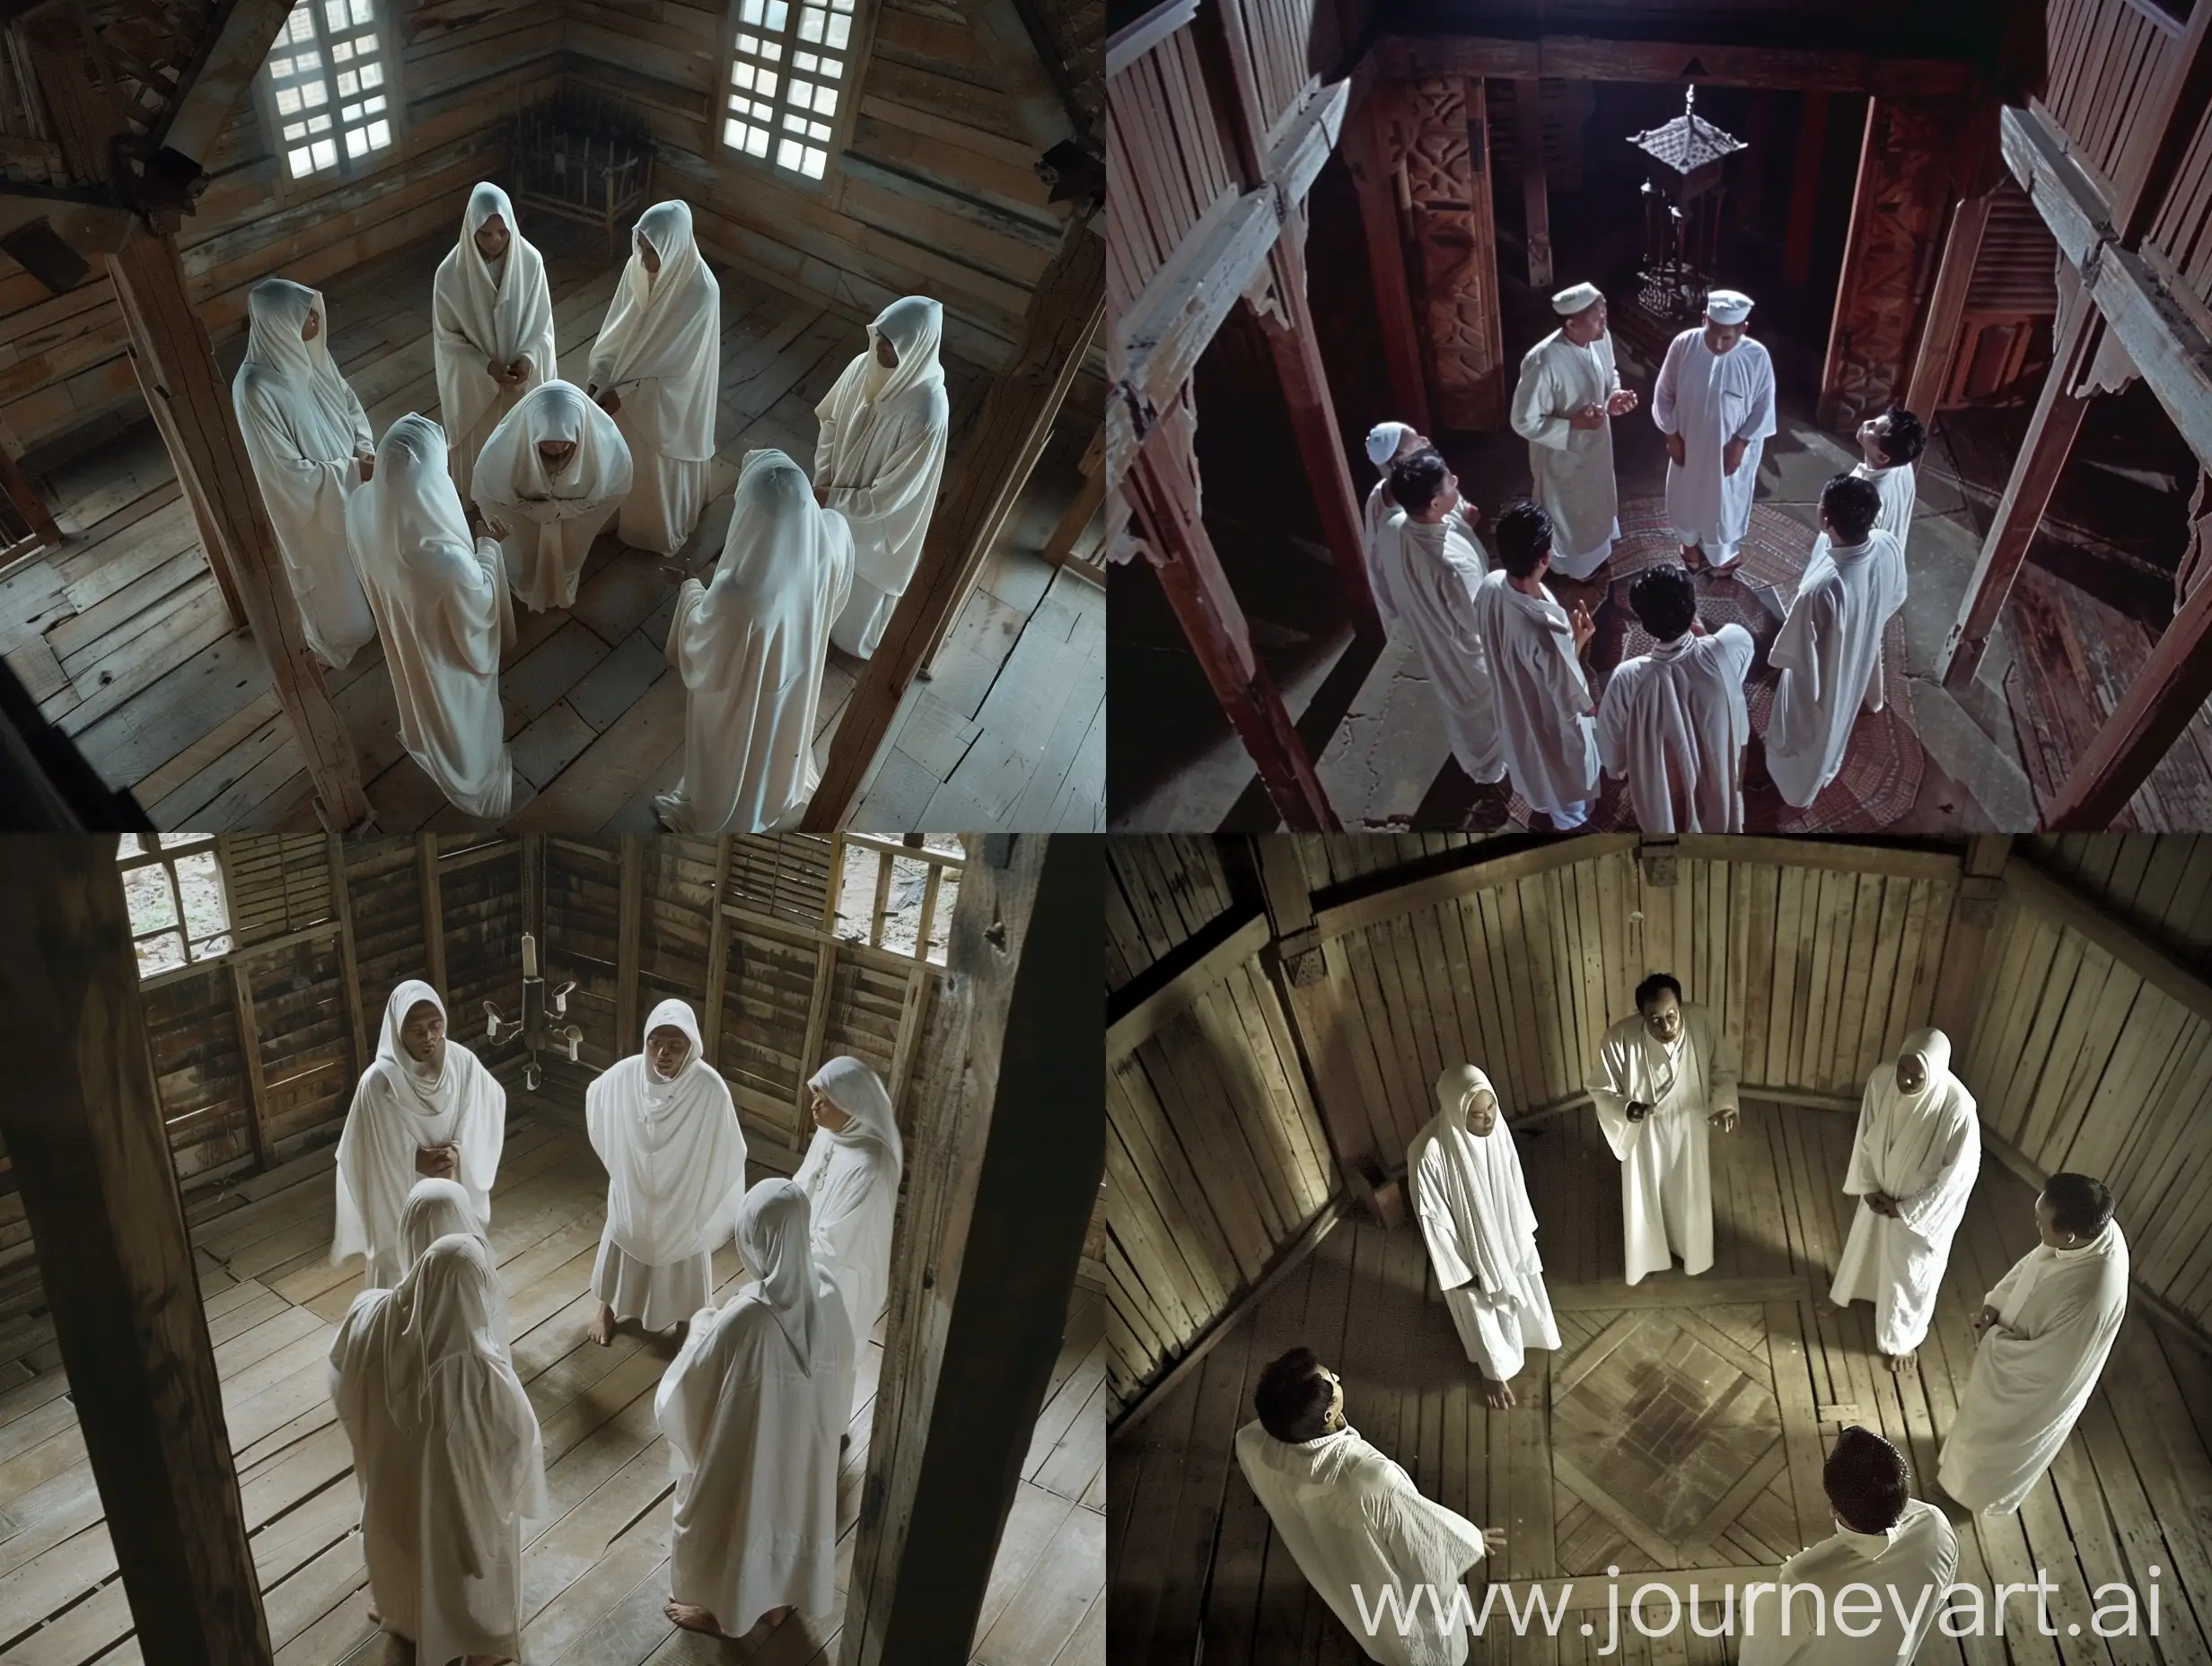 cinematic horror film, 5 Indonesian men dressed in white robes, gathered in a circle, inside a wooden mosque,